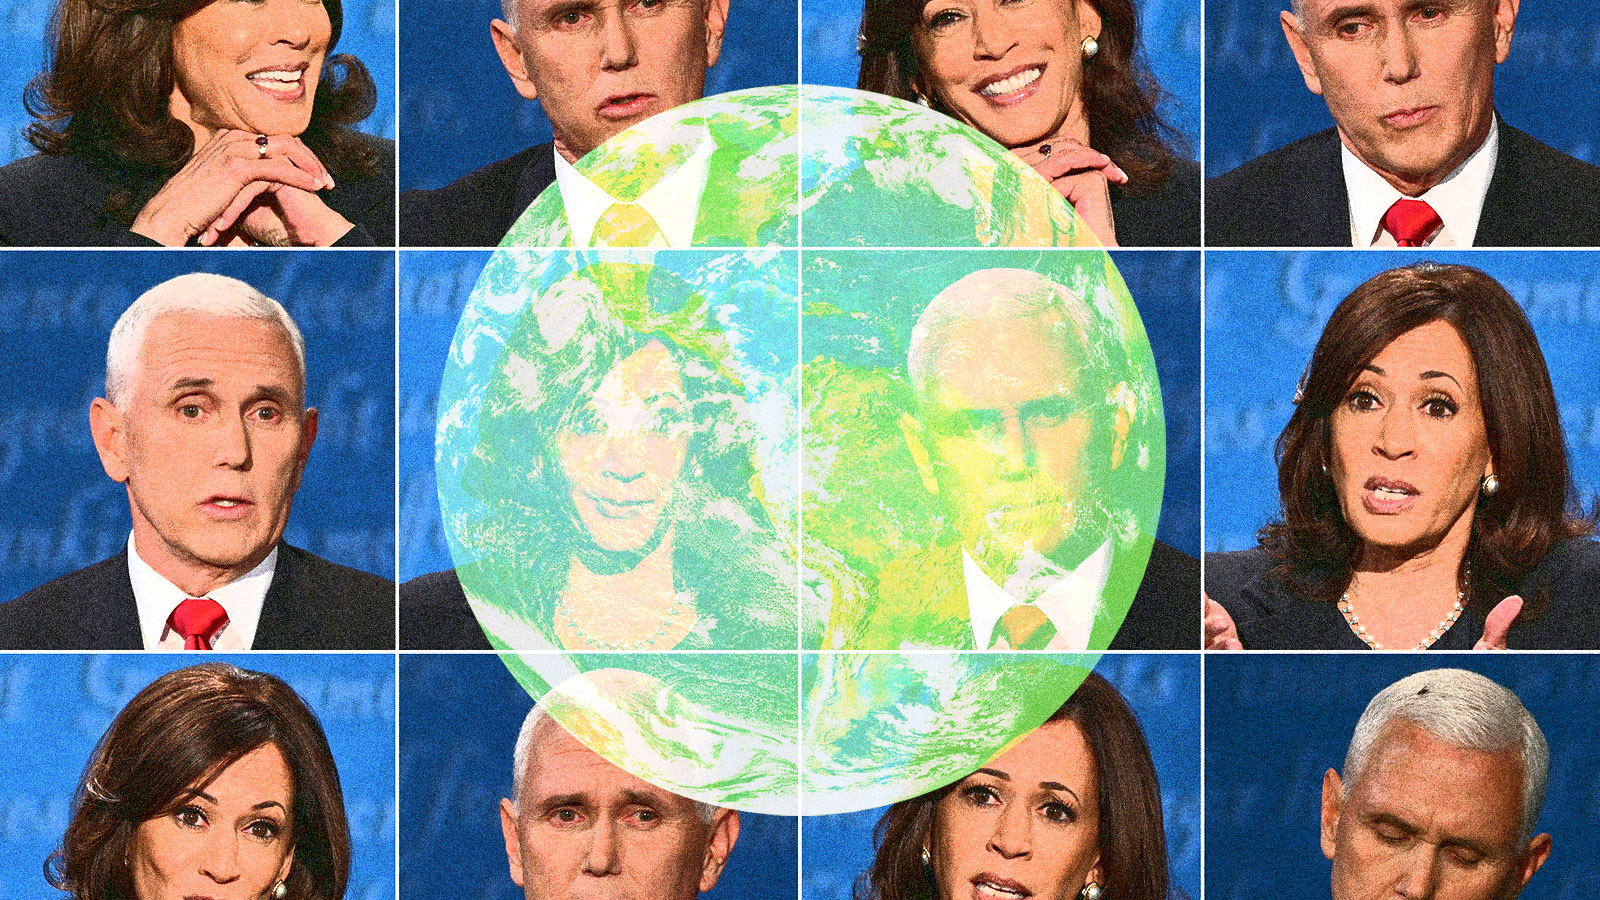 A compilation of Kamala Harris and Mike Pence's expressions from the Vice Presidential debate with an earth in the middle of the image